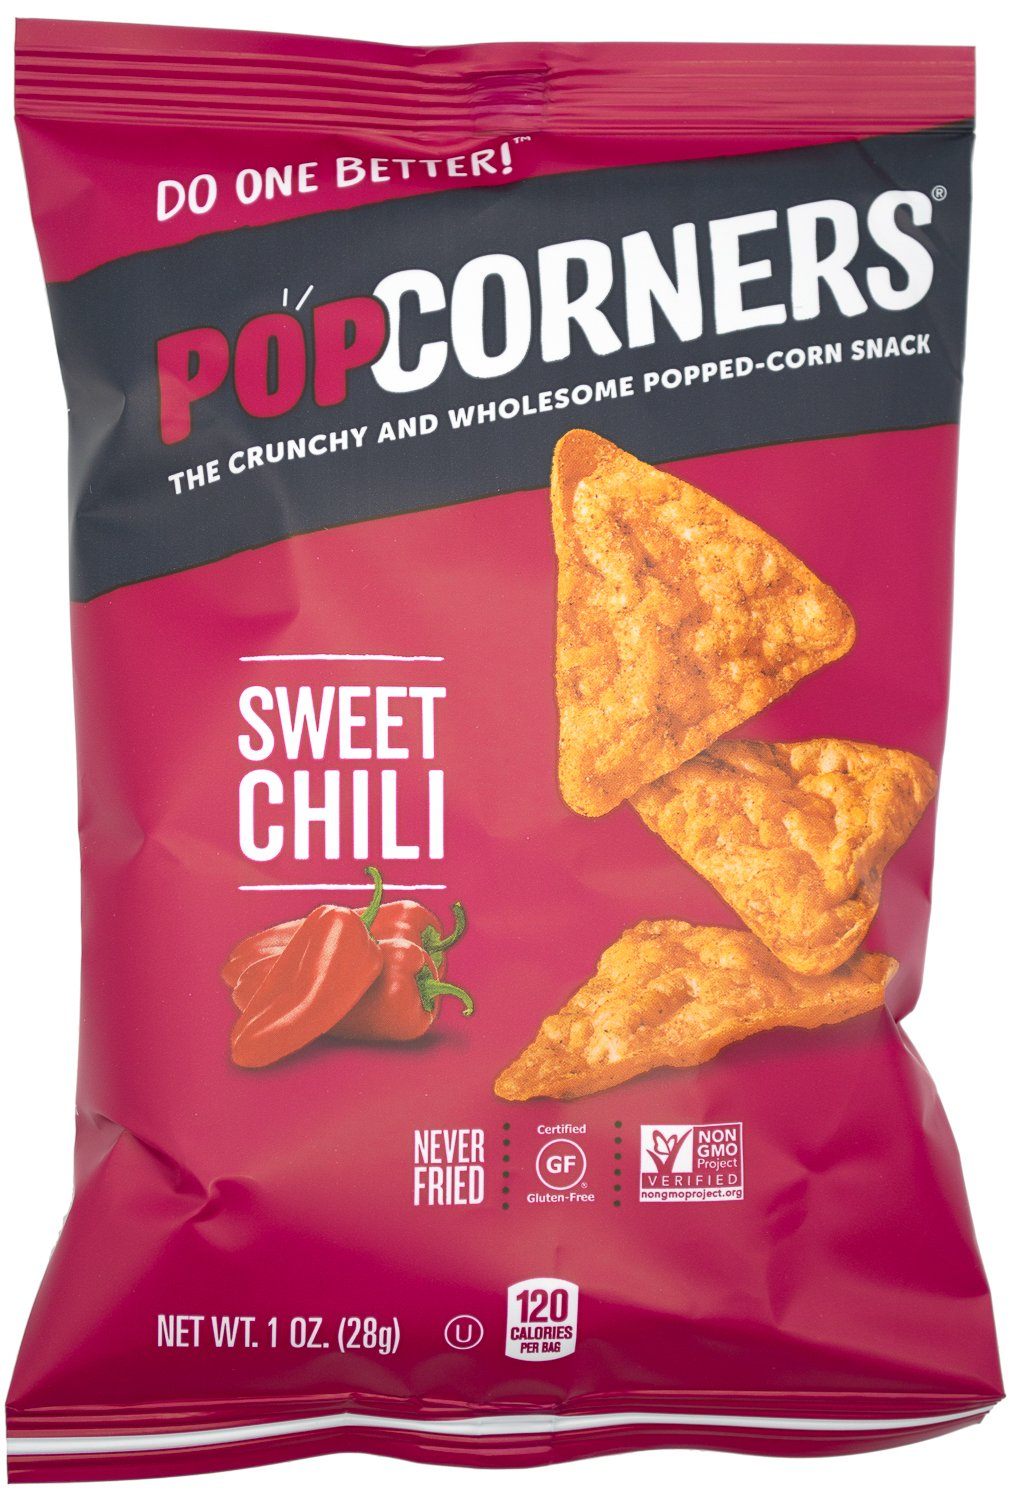 Popcorners - The Crunchy and Wholesome Popped-corn Snack — Snackathon Foods